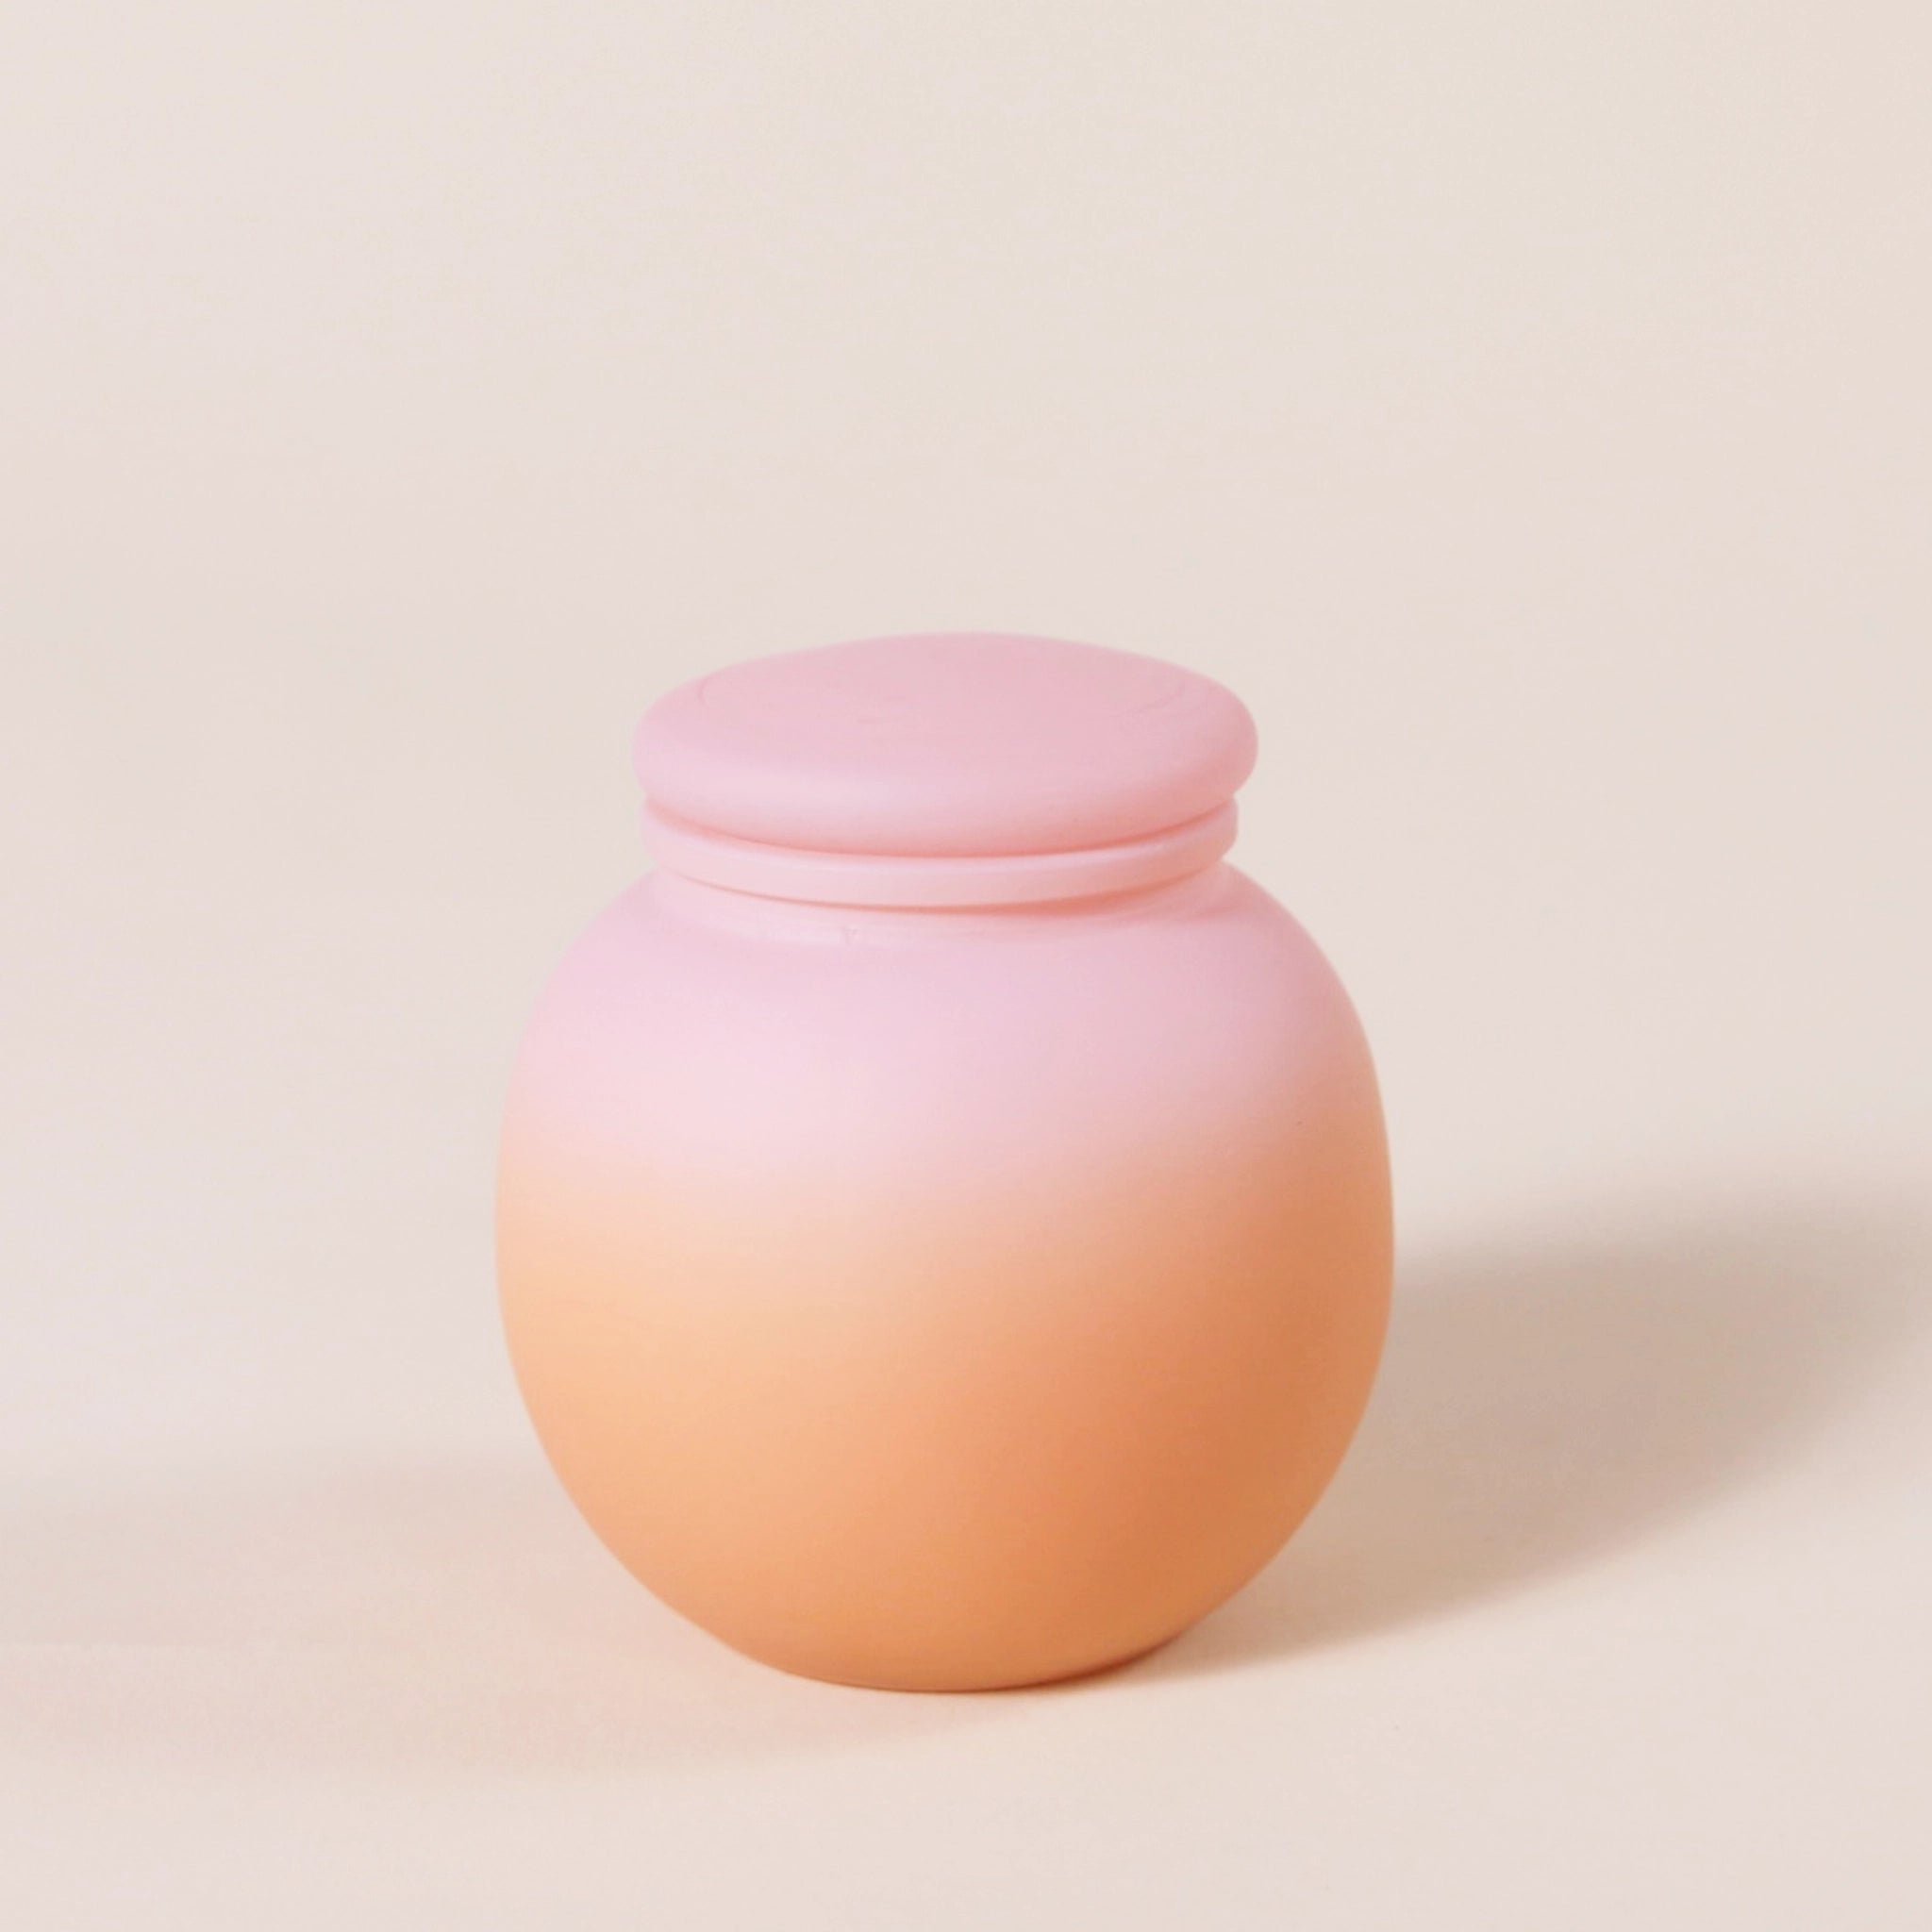 A round glass candle with a pink to orange ombre frosted finish along with a rounded lid.